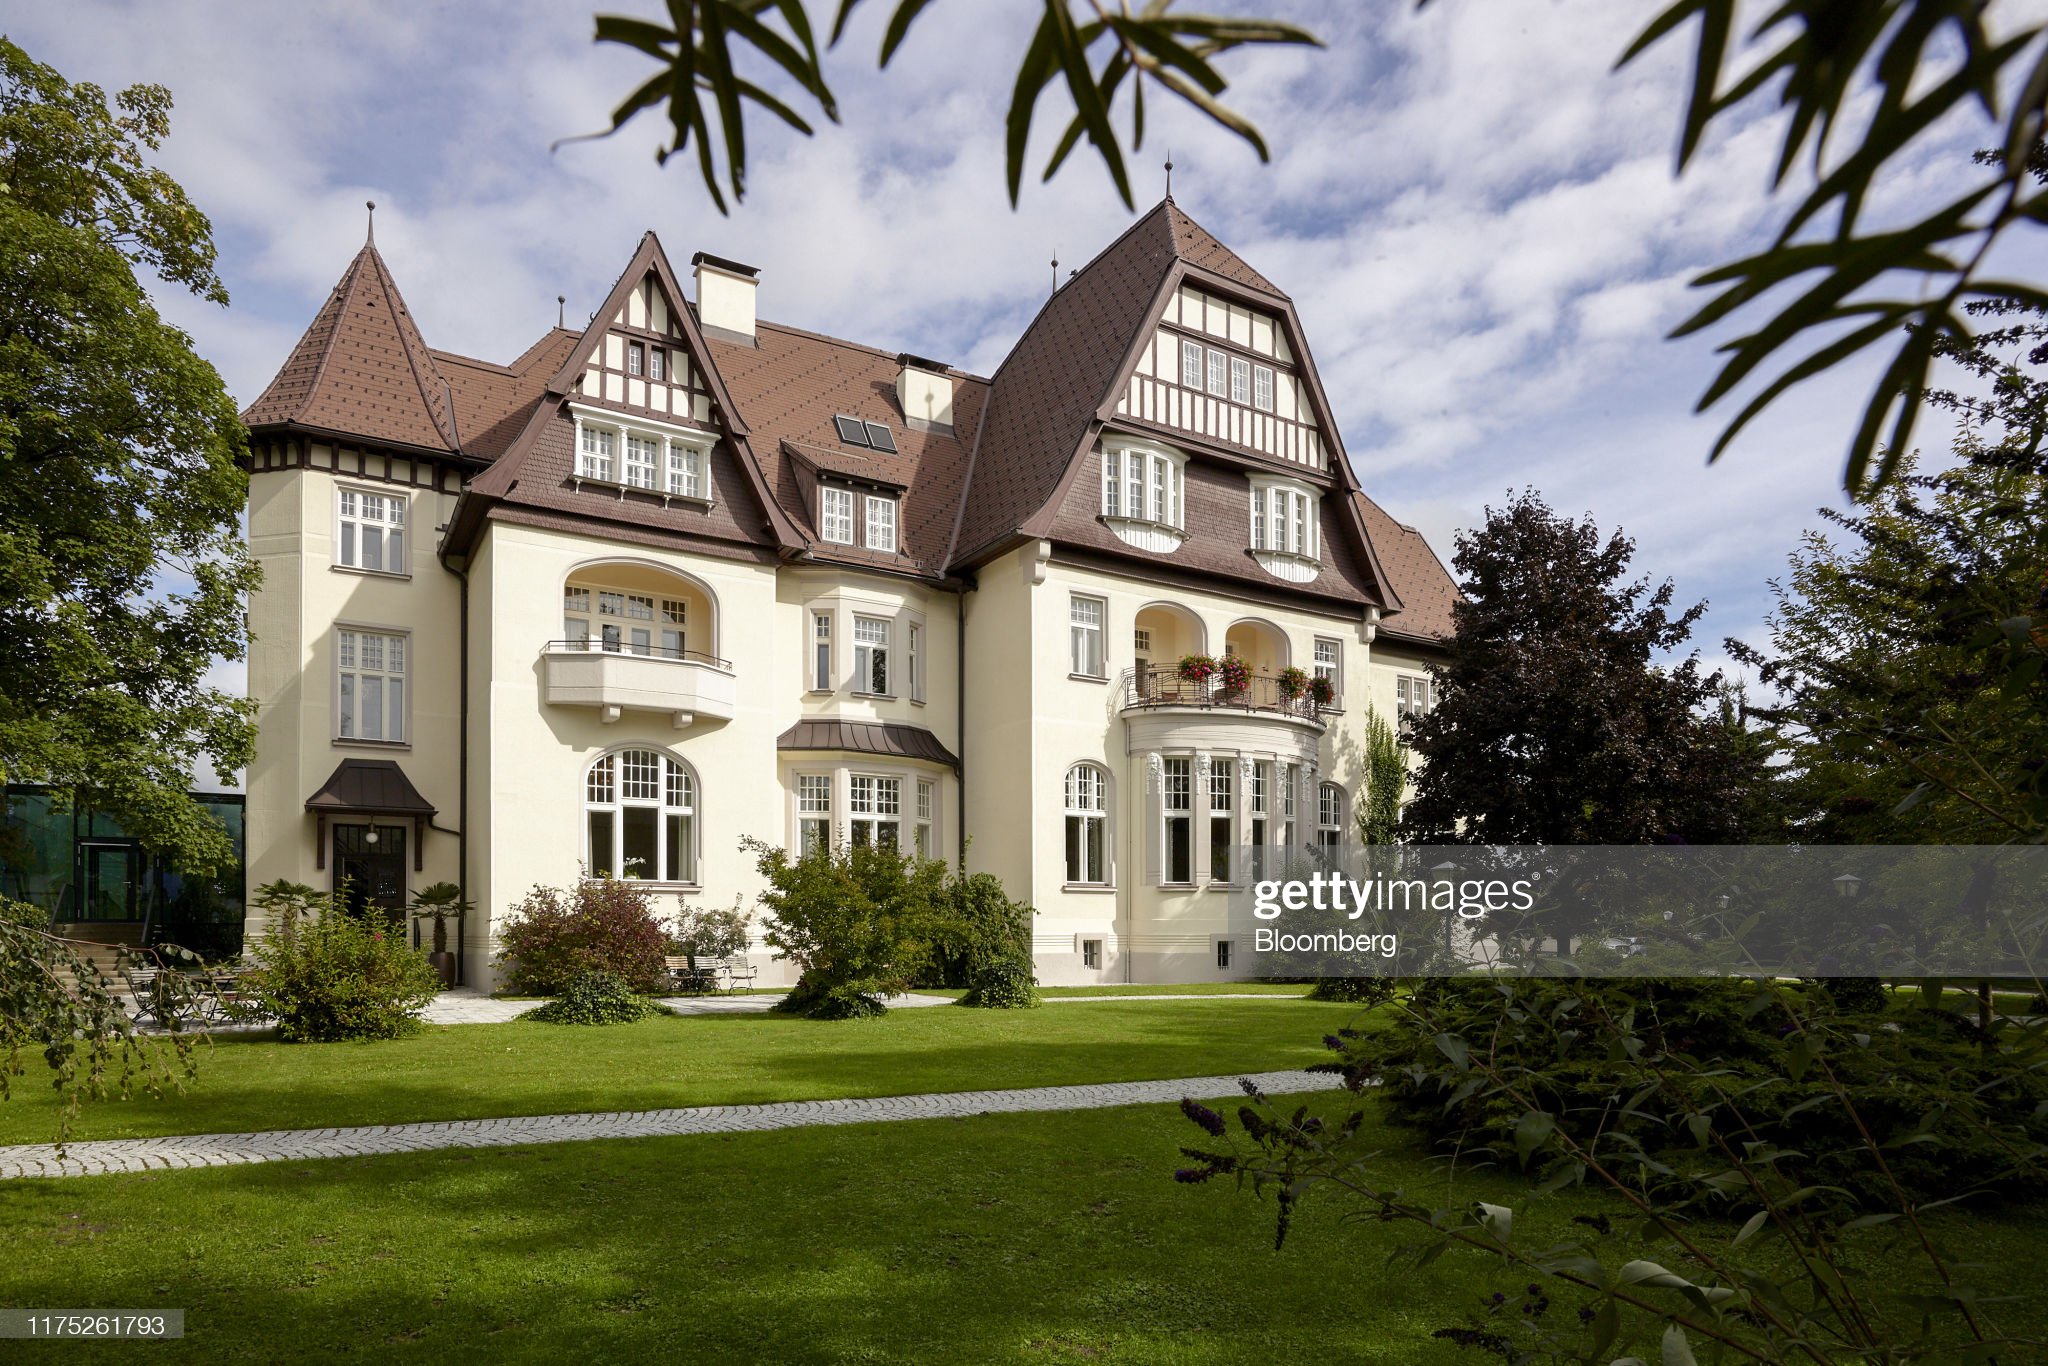 The Hotel Steirerschlossl stands in Zeltweg, Austria, on September 09, 2019. Discreetly, Red Bull billionaire Dietrich Mateschitz has been on a decade-long acquisition spree in the Austrian Alps, buying castles and villas from churches or aristocratic families that couldn’t afford their upkeep. 